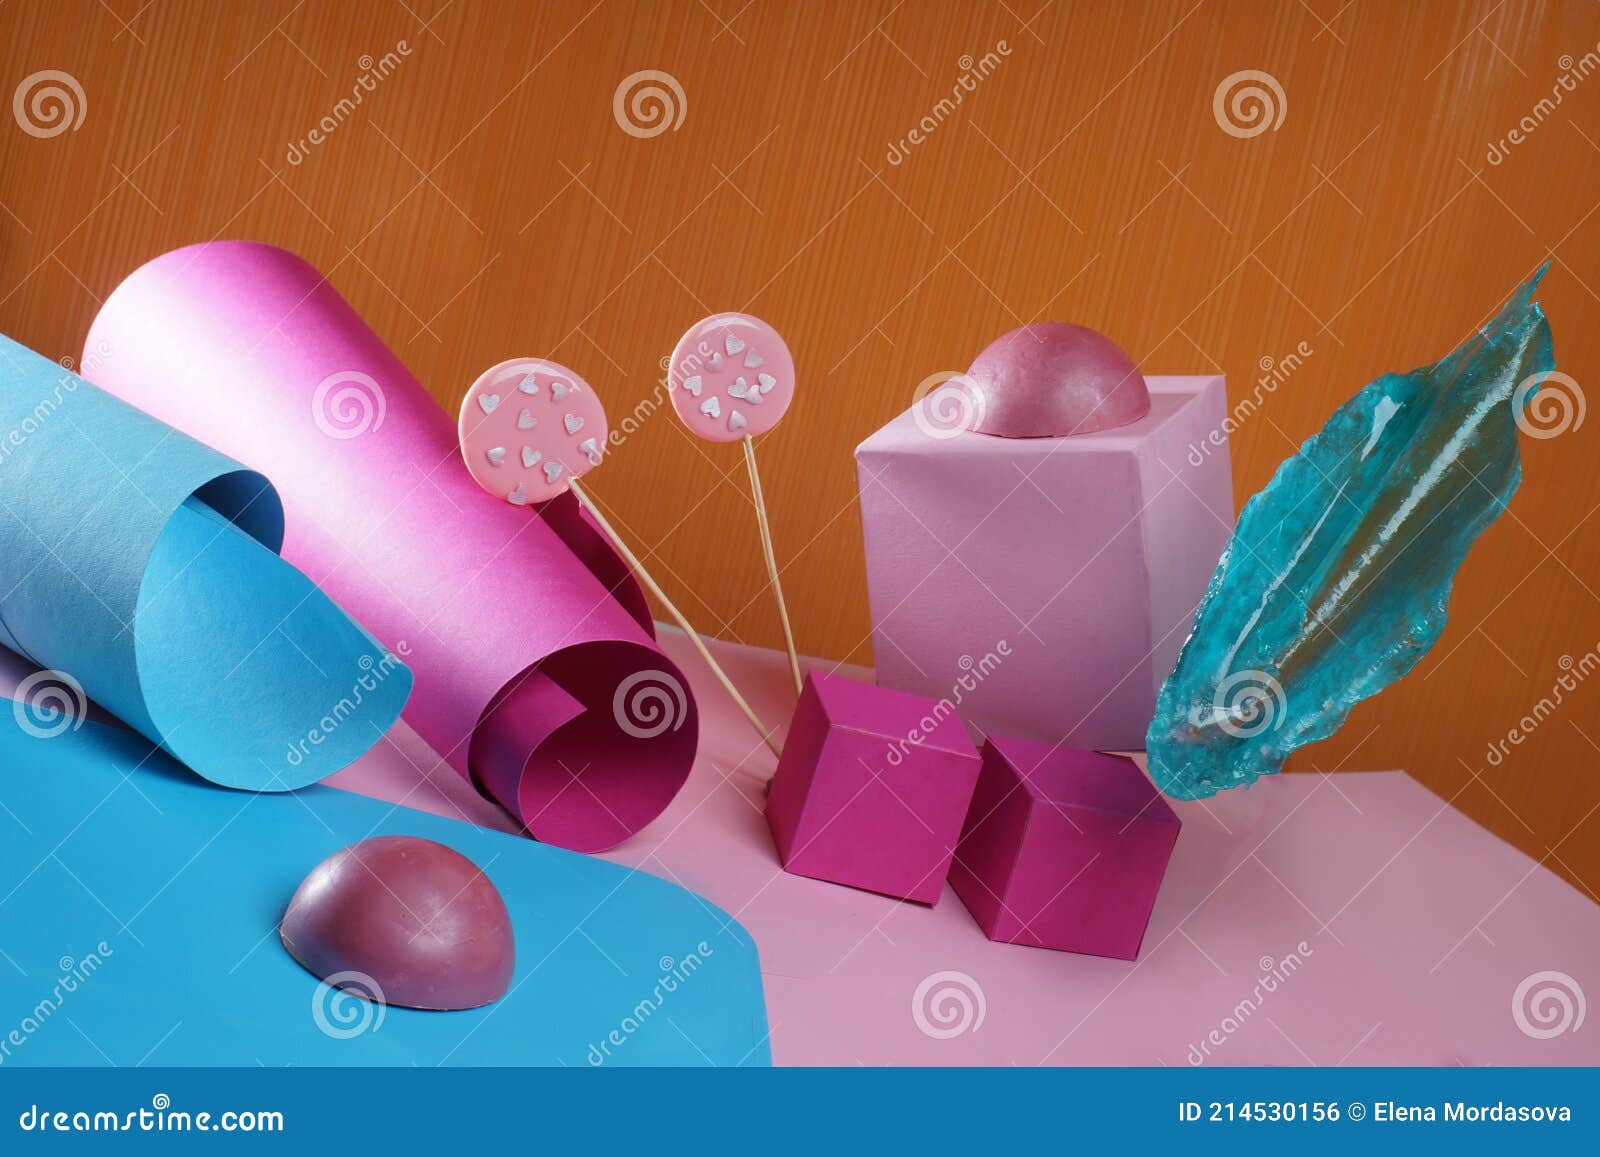 Pink And Blue Sweets On A Background Of Bright Cardboard Shapes Stock